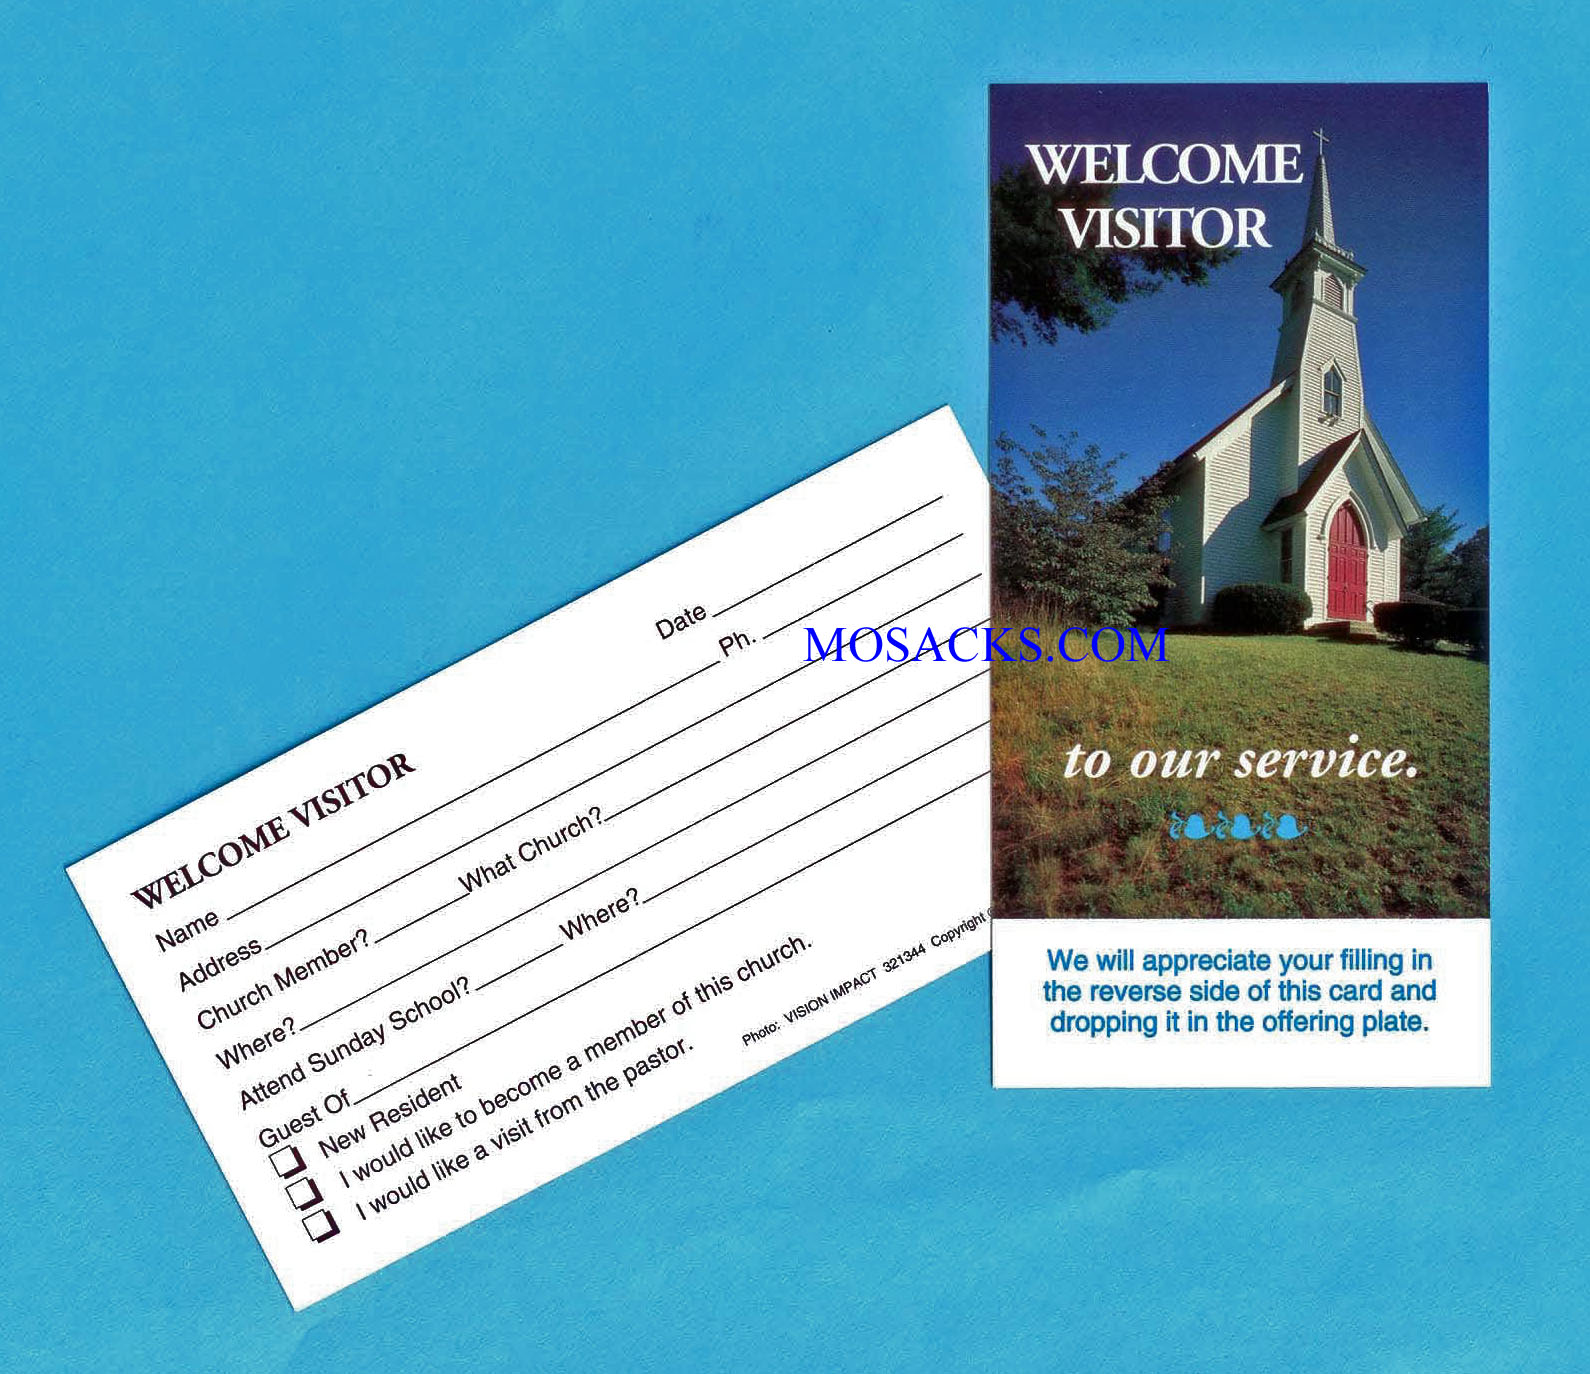 Welcome Visitor Card 3" x 5", 25 Count